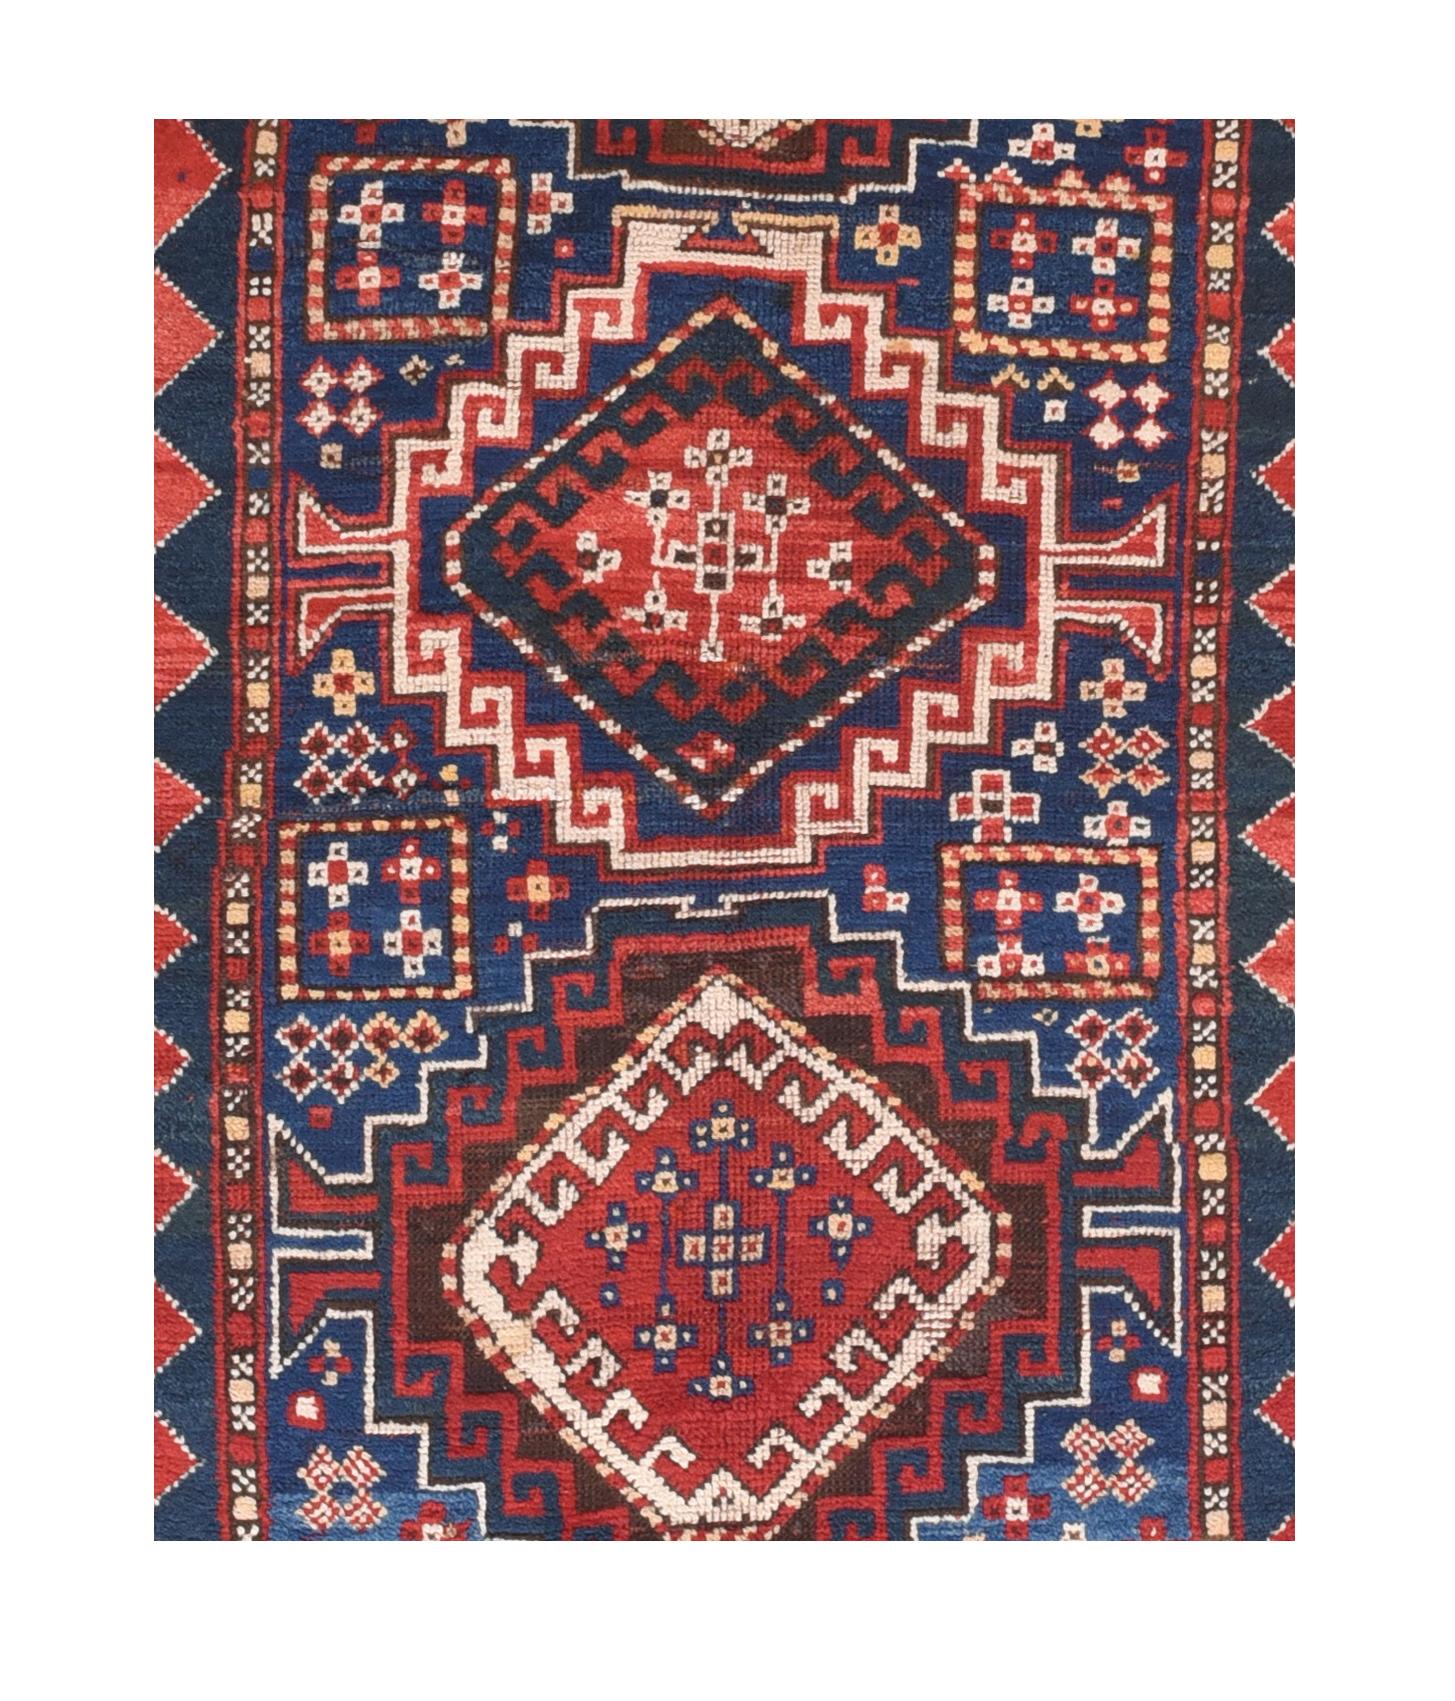 Antique Caucasian rugs were woven by tribal weavers of the south Russian region, near the Caucasus mountains, between the Black and Caspian seas. Although, Caucasian carpets were made by many different tribal groups, they have many common